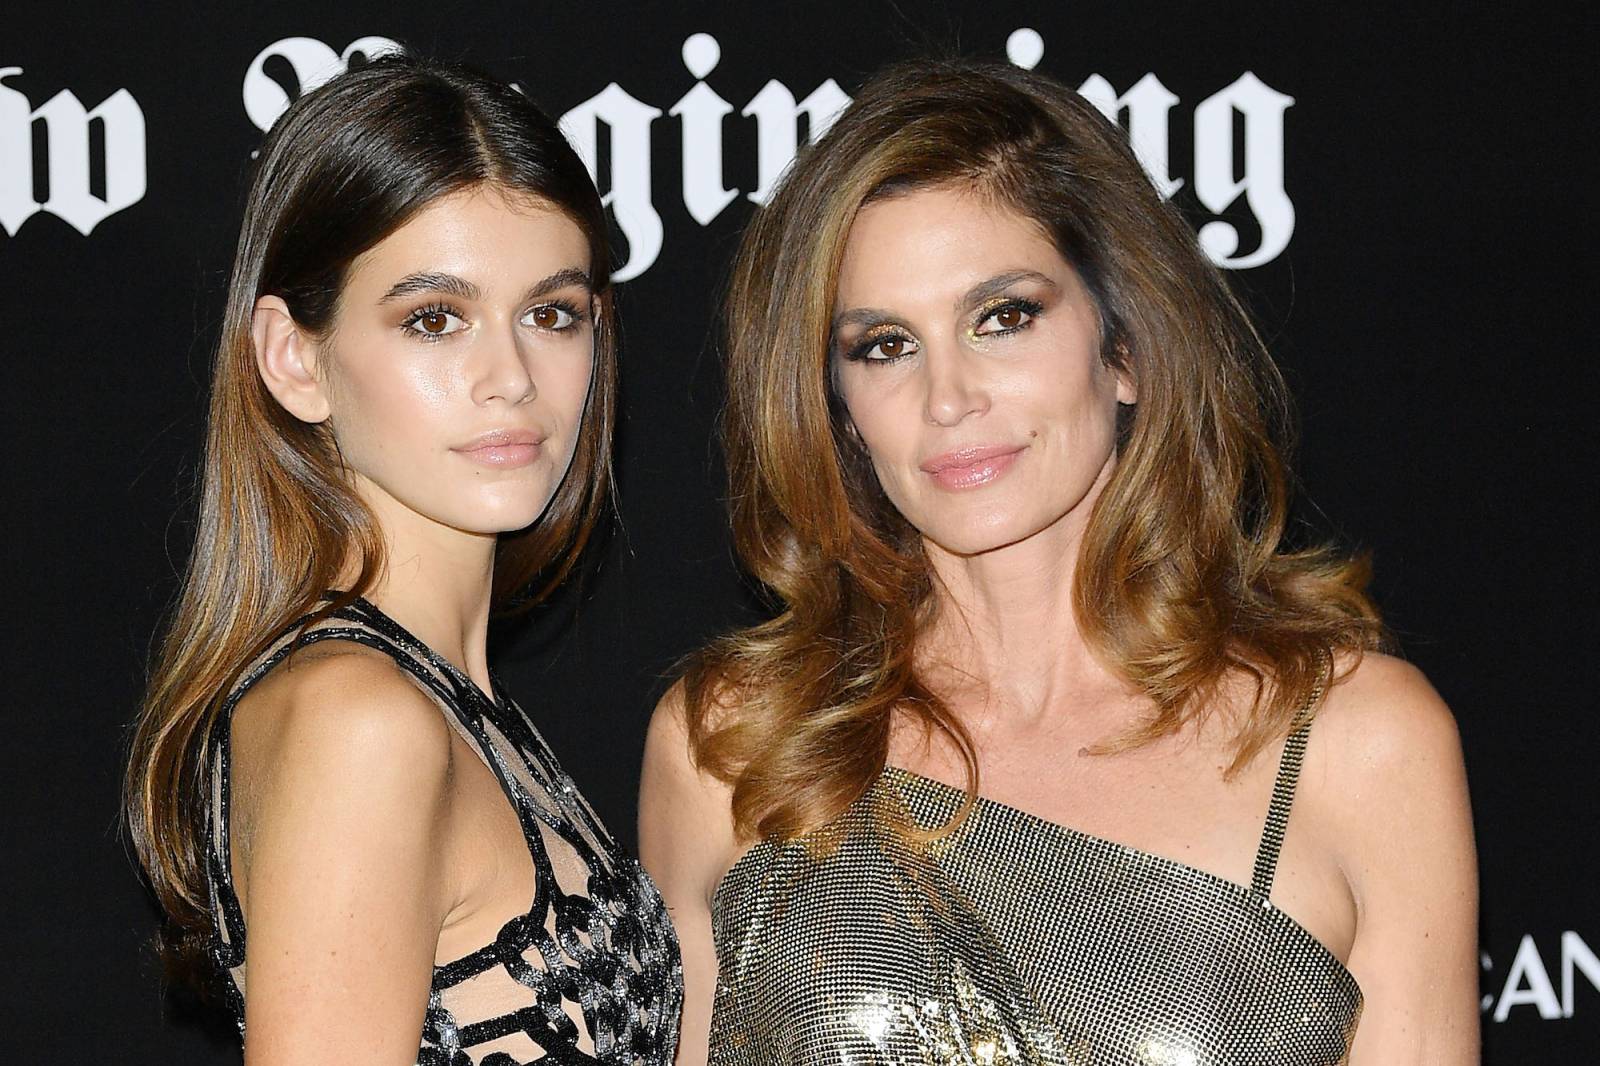 Kaia Gerber i Cindy Crawford (Fot. Getty Images)